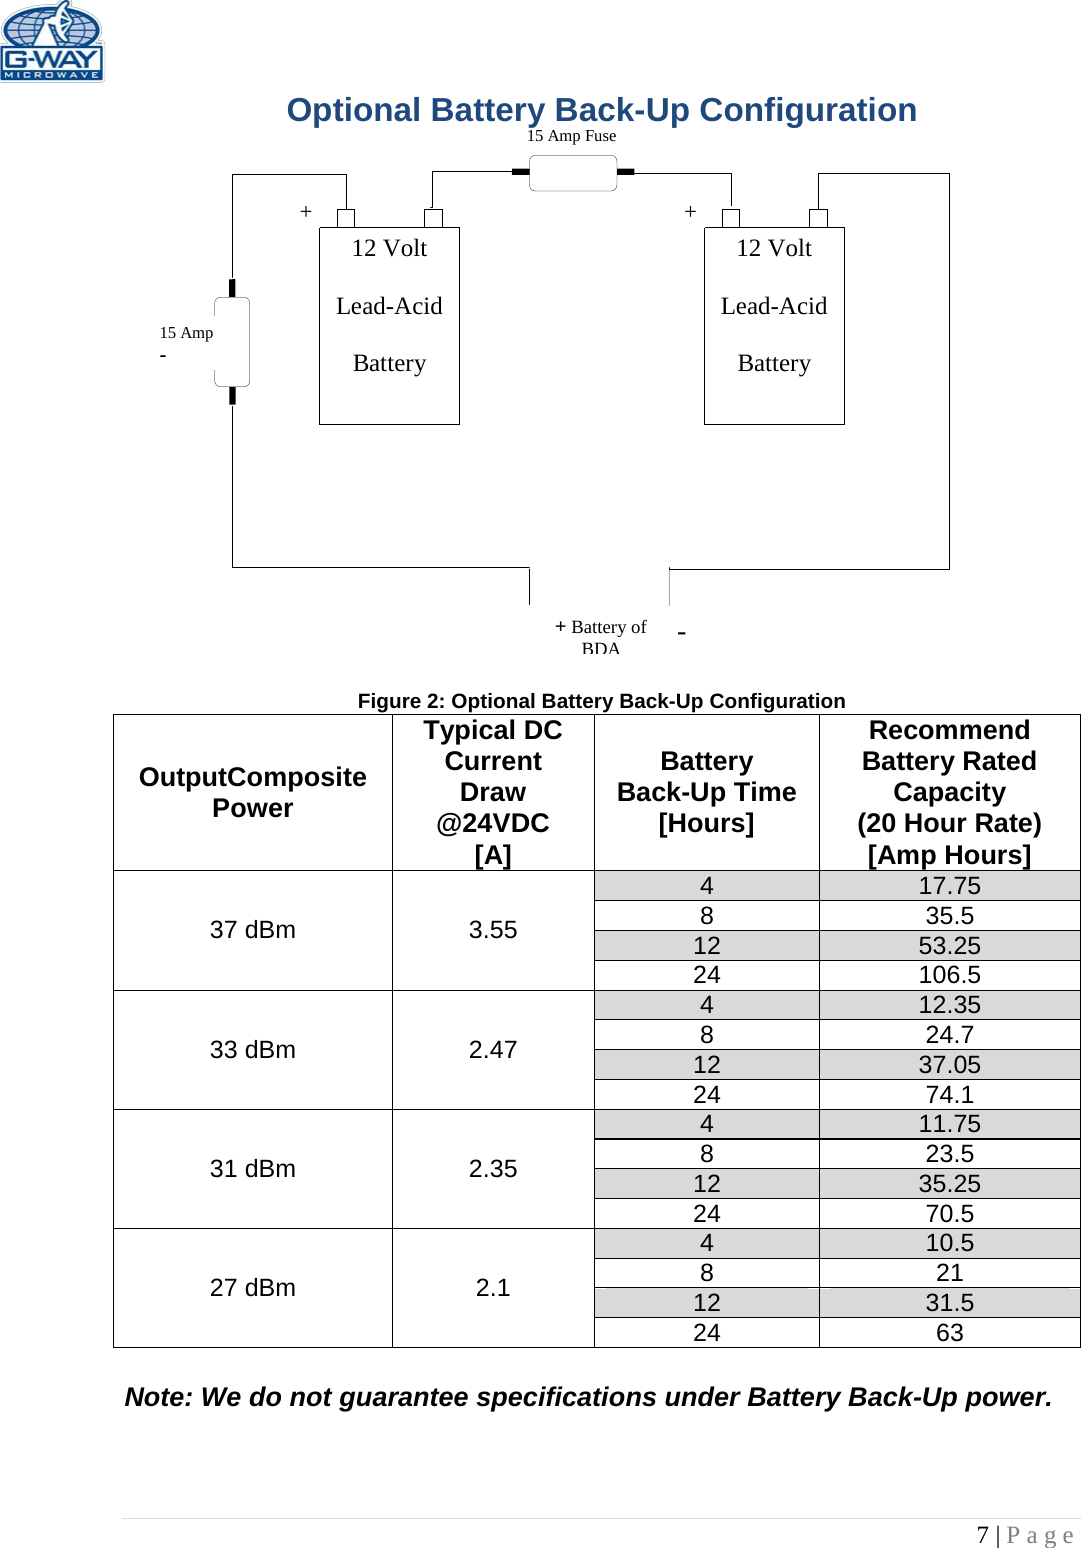   7 | Page  15 Amp Fuse 15 Amp -       12 Volt  Lead-Acid  Battery  12 Volt  Lead-Acid  Battery  + + + Battery of  BDA - Optional Battery Back-Up Configuration                  Figure 2: Optional Battery Back-Up Configuration OutputComposite Power Typical DC Current  Draw @24VDC [A] Battery Back-Up Time [Hours] Recommend Battery Rated Capacity (20 Hour Rate) [Amp Hours] 37 dBm 3.55 4 17.75 8 35.5 12 53.25 24 106.5 33 dBm 2.47 4 12.35 8 24.7 12 37.05 24 74.1 31 dBm  2.35 4 11.75 8 23.5 12 35.25 24 70.5 27 dBm 2.1 4 10.5 8 21 12 31.5 24 63  Note: We do not guarantee specifications under Battery Back-Up power.  